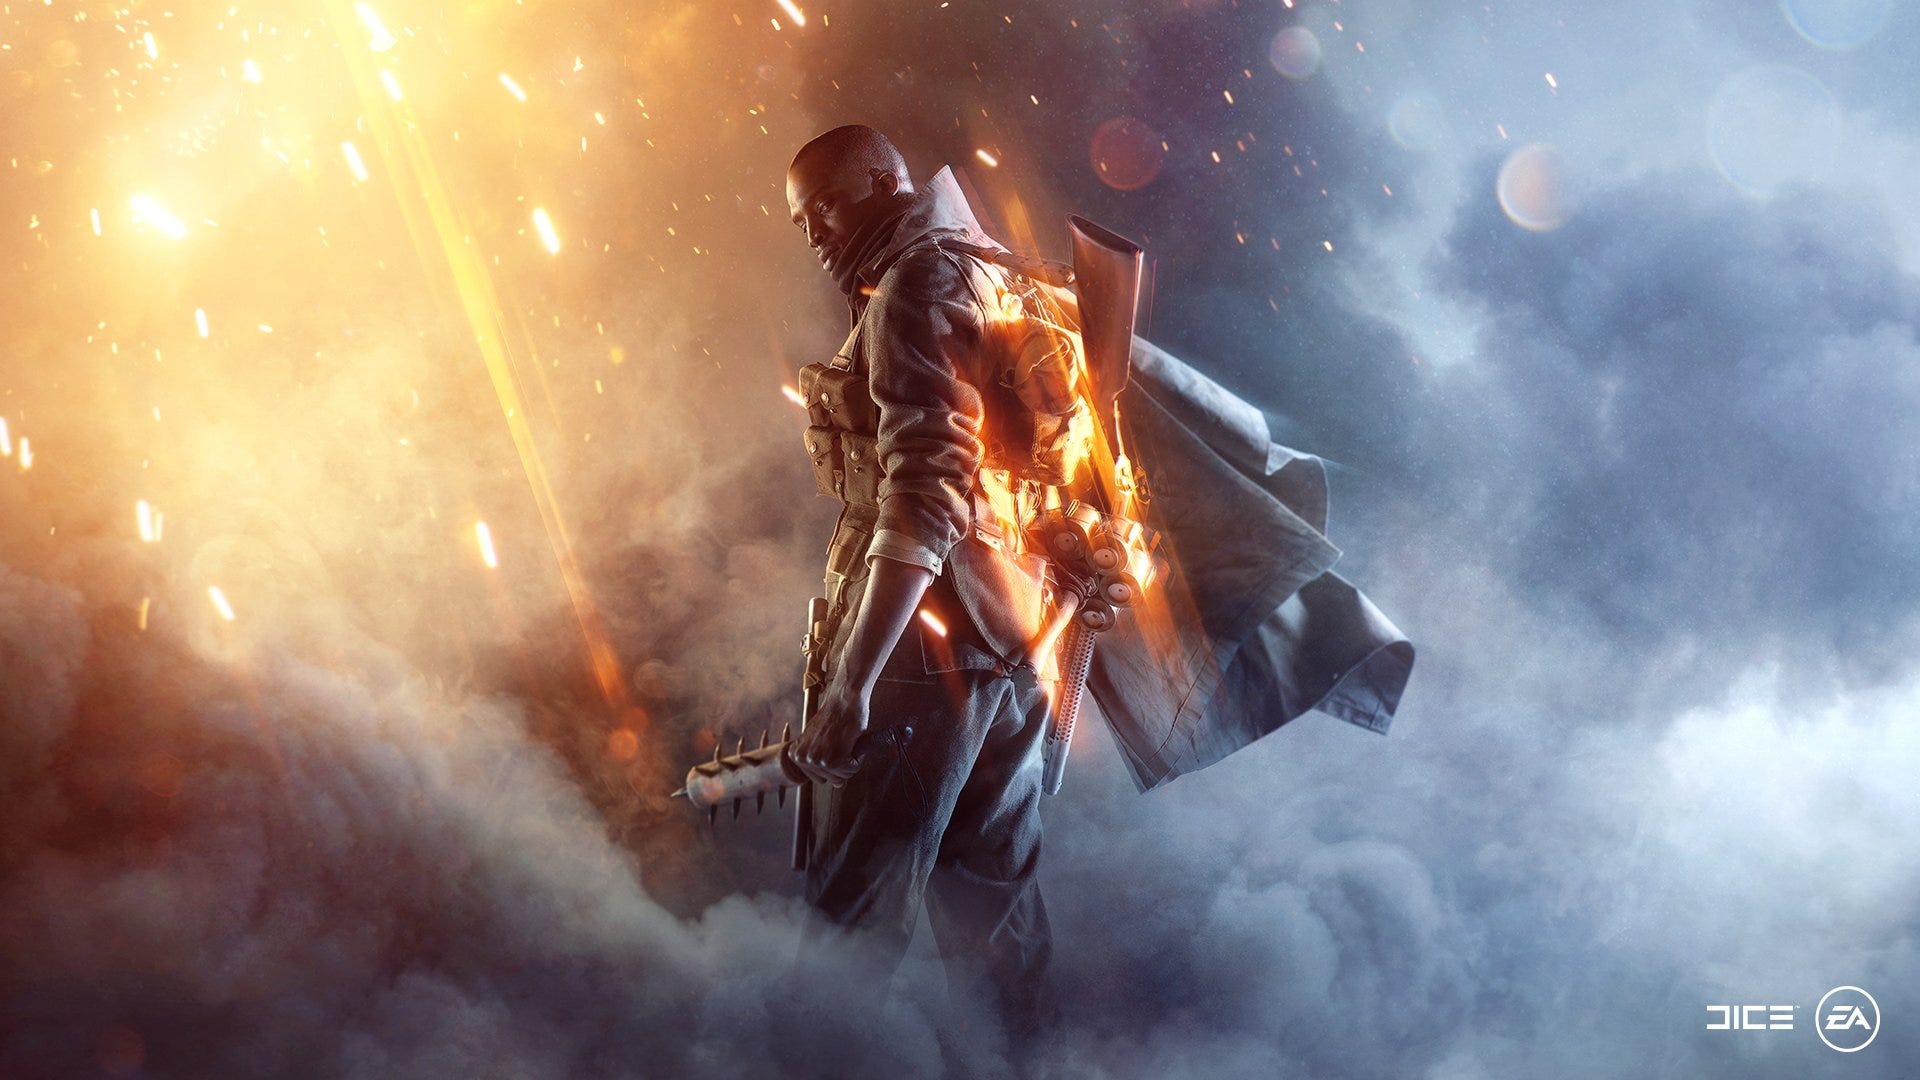 battlefield 1 ps3 - Online Discount Shop for Electronics, Apparel, Toys,  Books, Games, Computers, Shoes, Jewelry, Watches, Baby Products, Sports &  Outdoors, Office Products, Bed & Bath, Furniture, Tools, Hardware,  Automotive Parts,